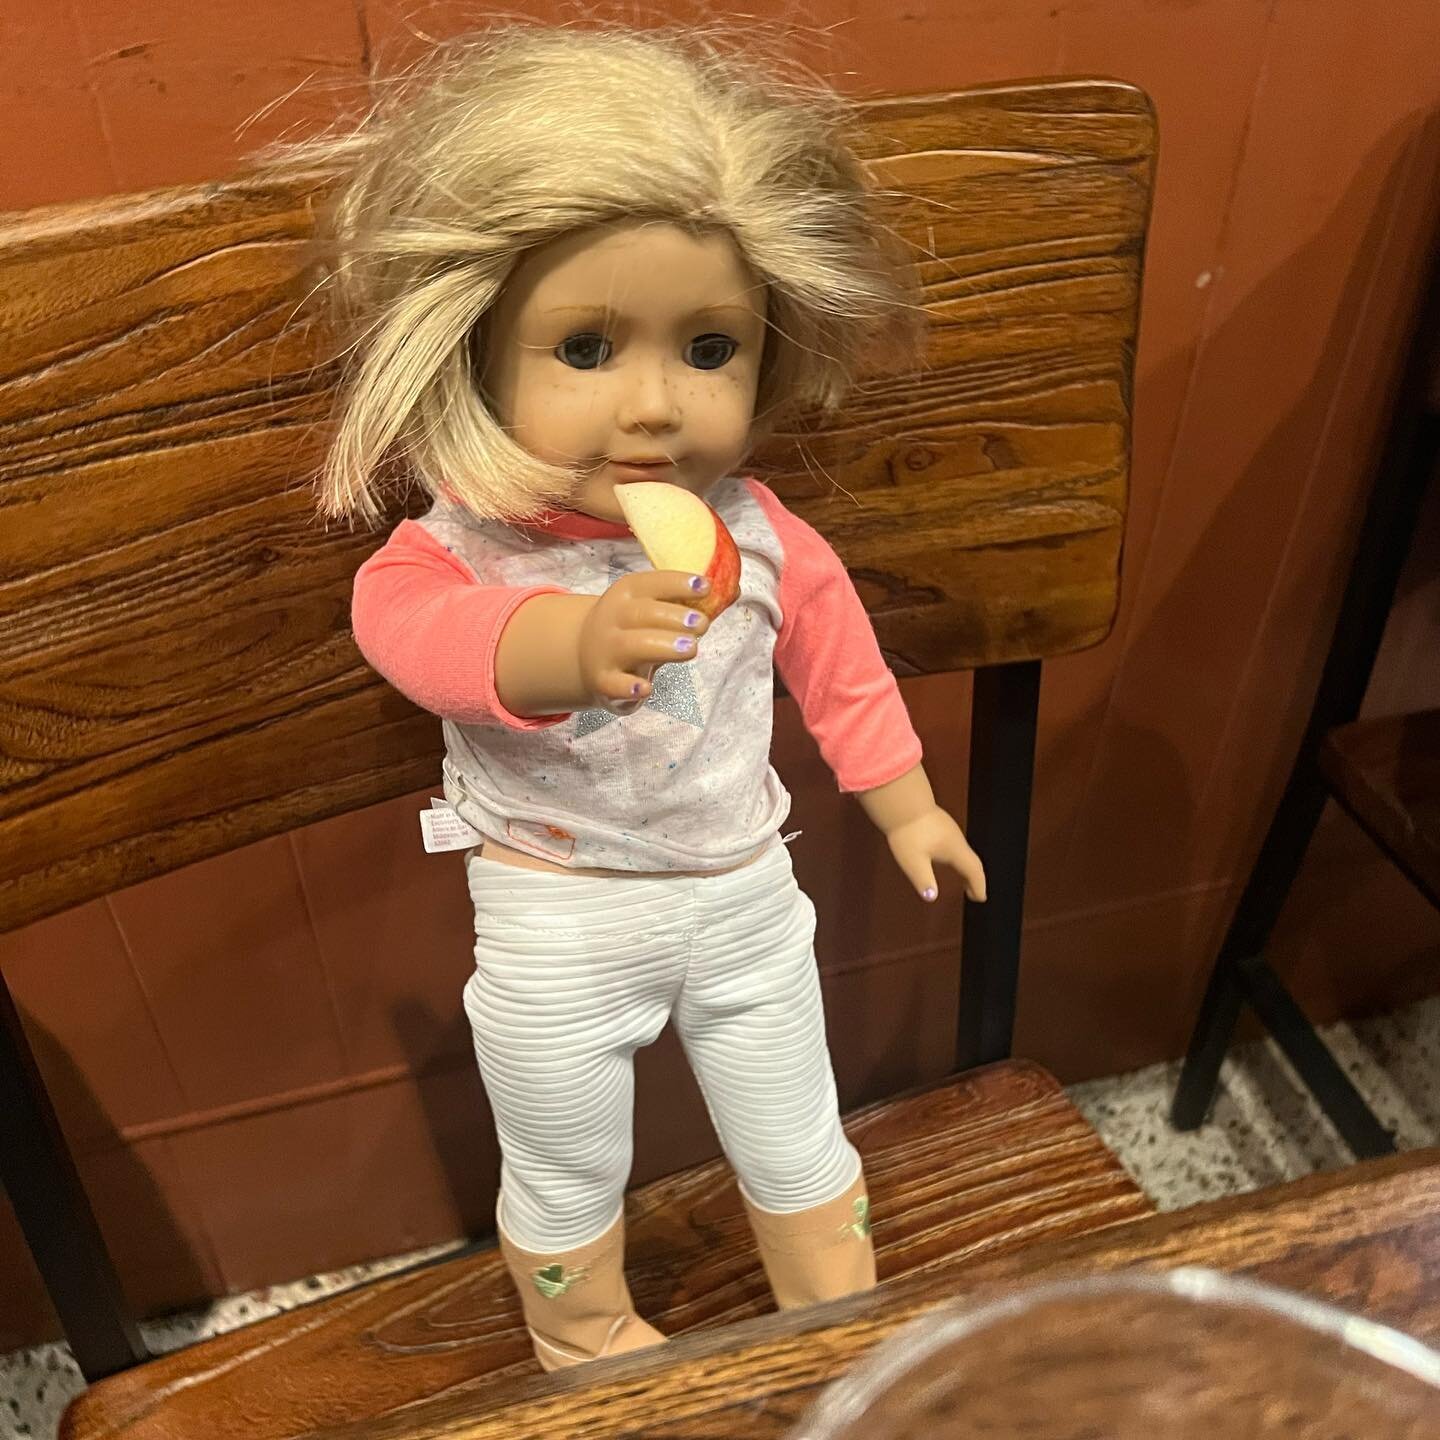 &ldquo;This is Lilly. I love her hair, it&rsquo;s crazy and frizzy. And she&rsquo;s in her pajamas.&rdquo;
And she has her very own seat at the restaurant, that&rsquo;s nice!
&ldquo;I just don&rsquo;t want to hold her, so I put her in the seat.&rdquo